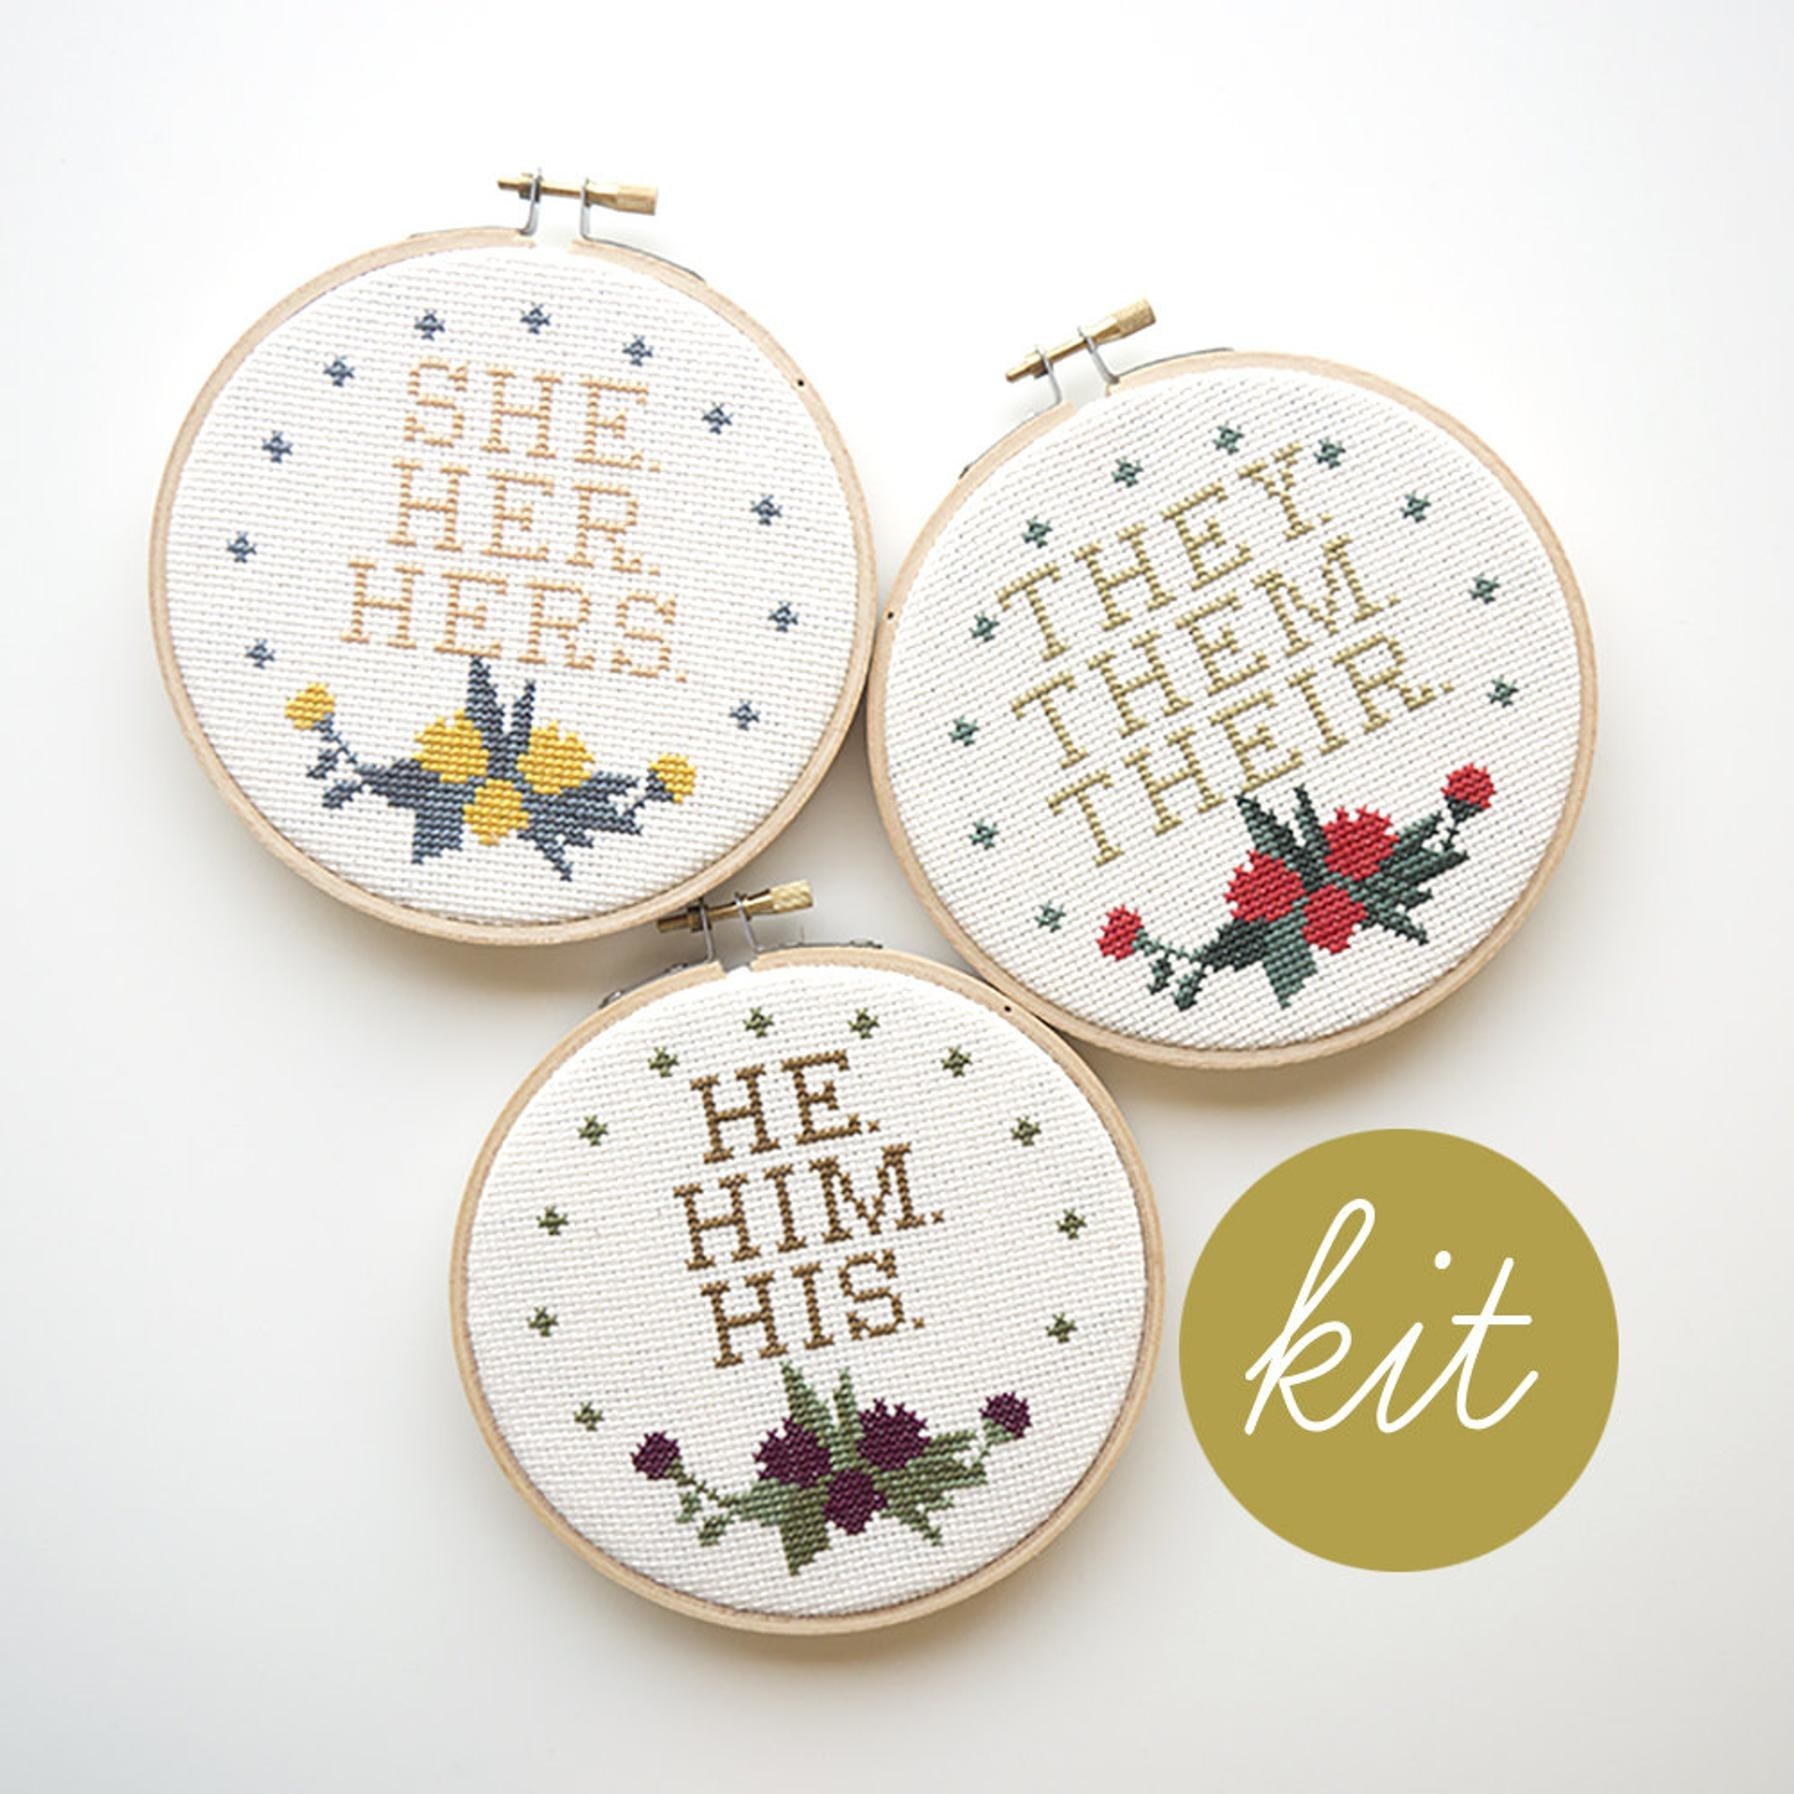 The embroidery hoops that say &quot;she, her, hers&quot;, &quot;they, them, their&quot;, and &quot;he, him, his&quot;